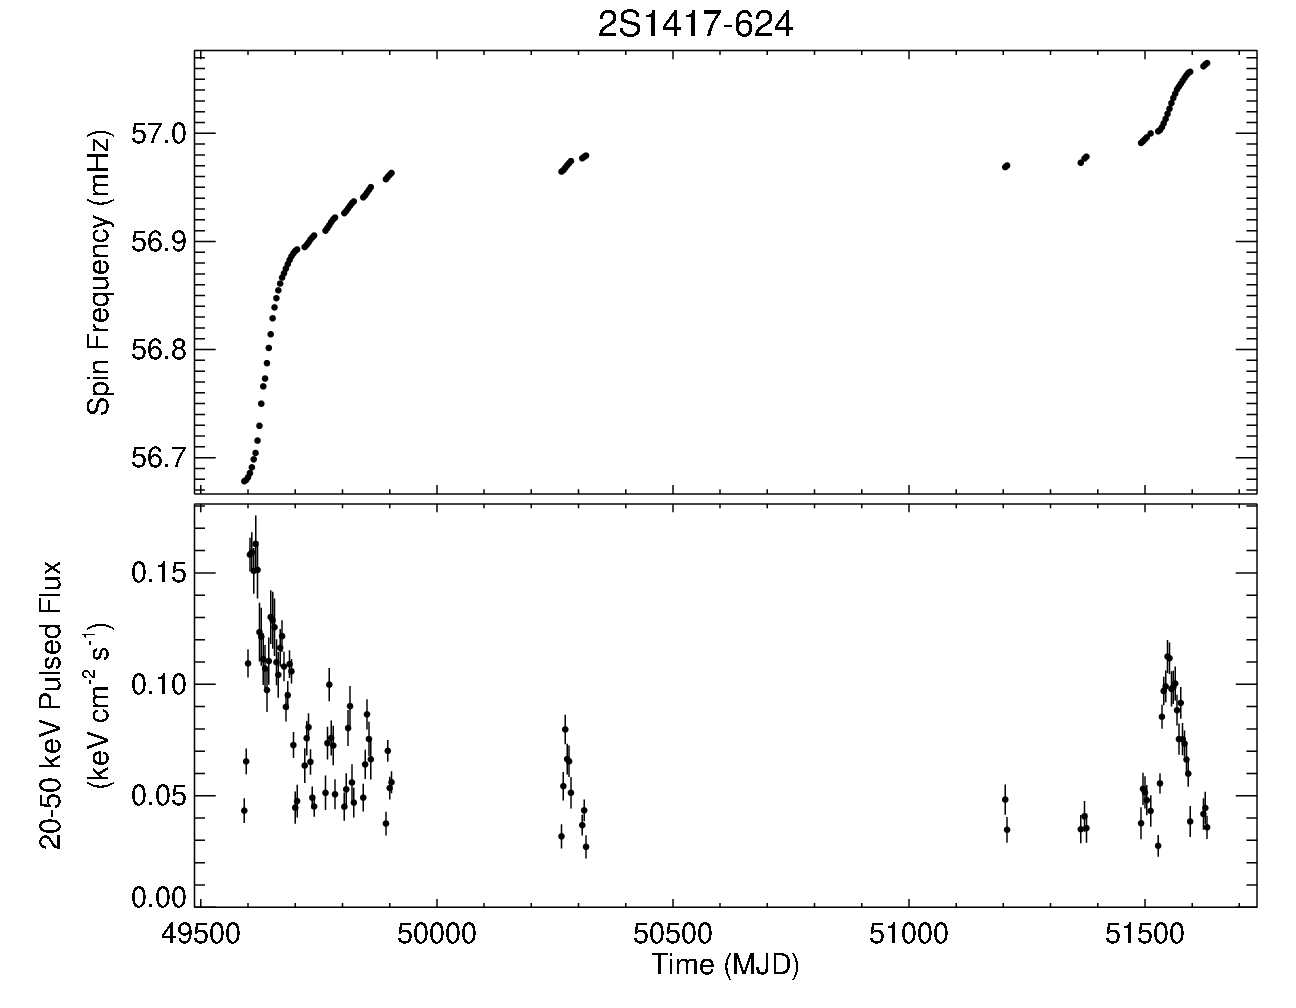 2S 1417-624 Short Frequency History